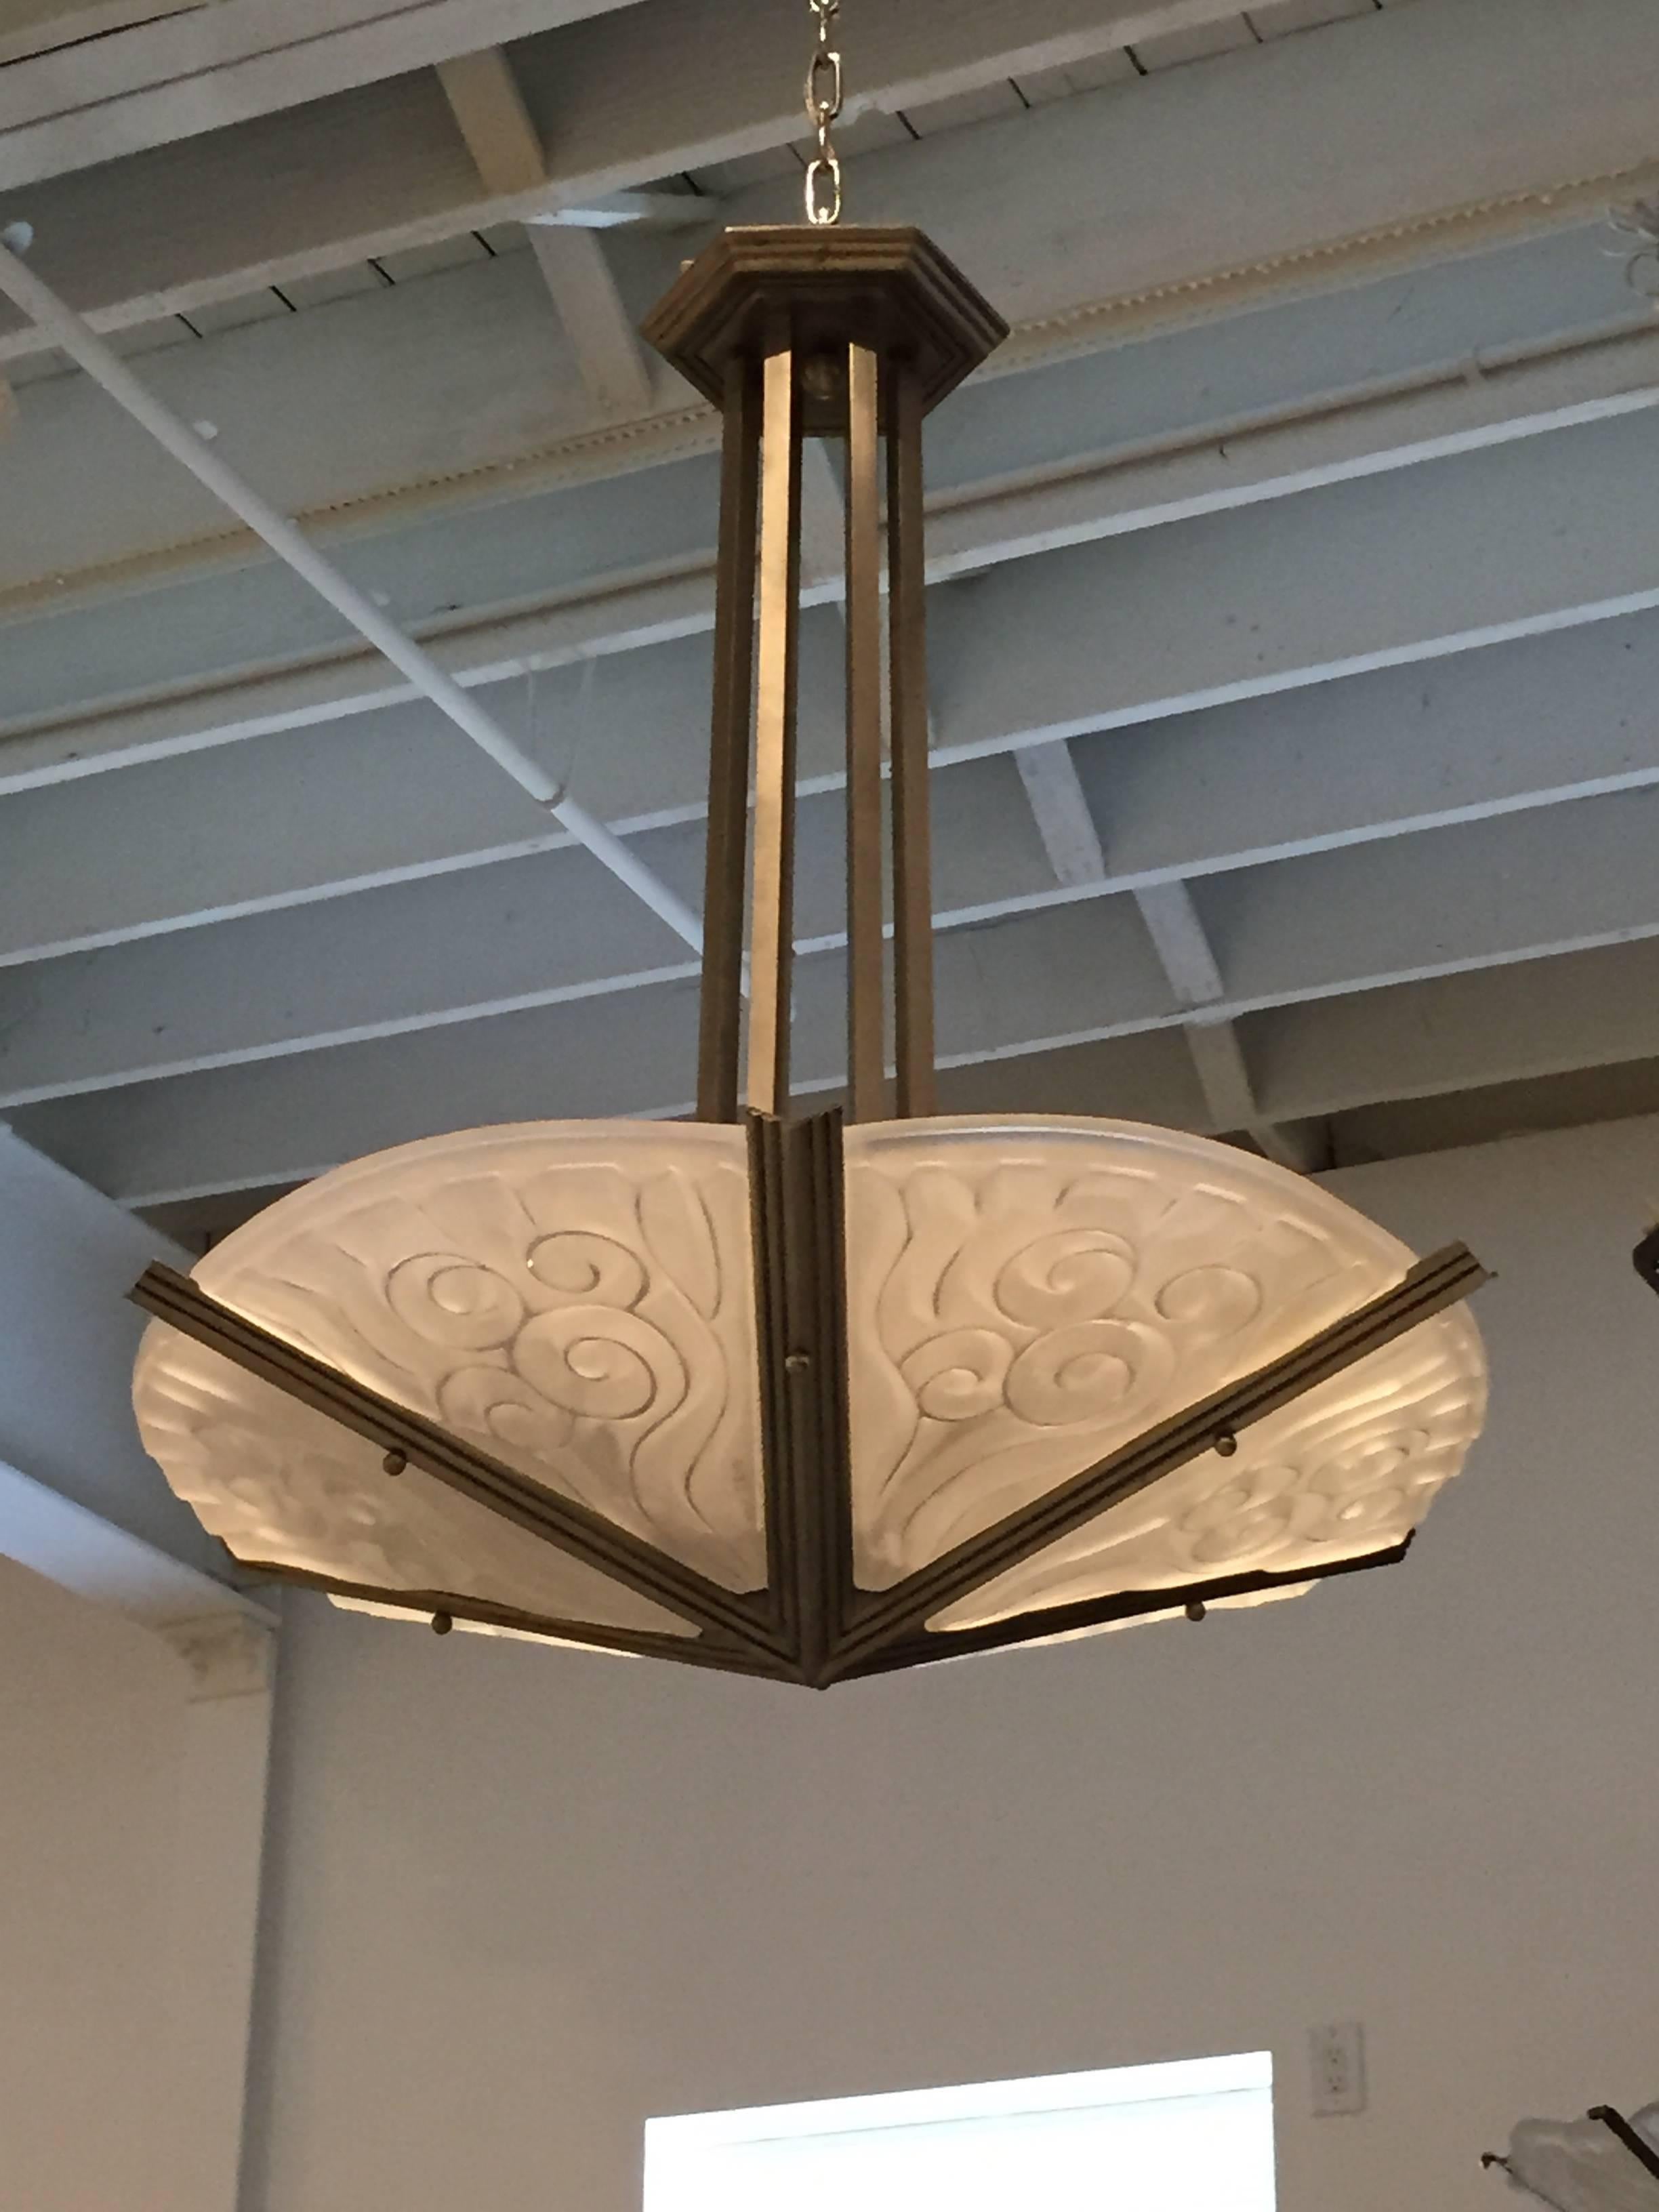 French Art Deco chandelier by the French artist David Gueron Degue. Shades are in clear frosted glass with geometric motif details. Supported by nickel matching layered multi-tiered design frame. Has been rewired for American use with six candelabra